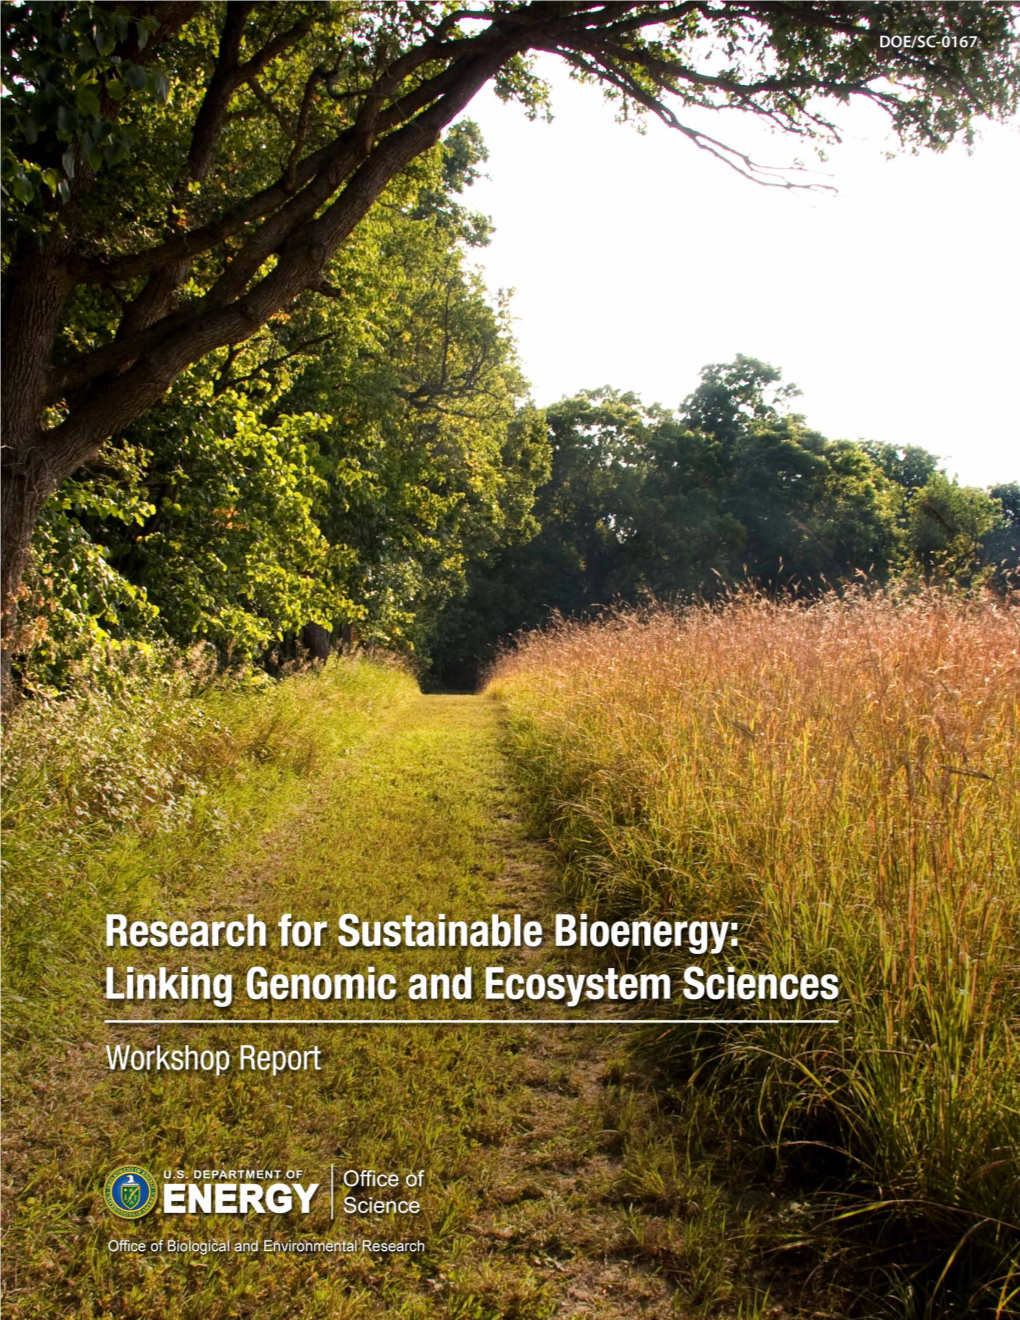 Research for Sustainable Bioenergy Workshop October 2–4, 2013 Convened by U.S